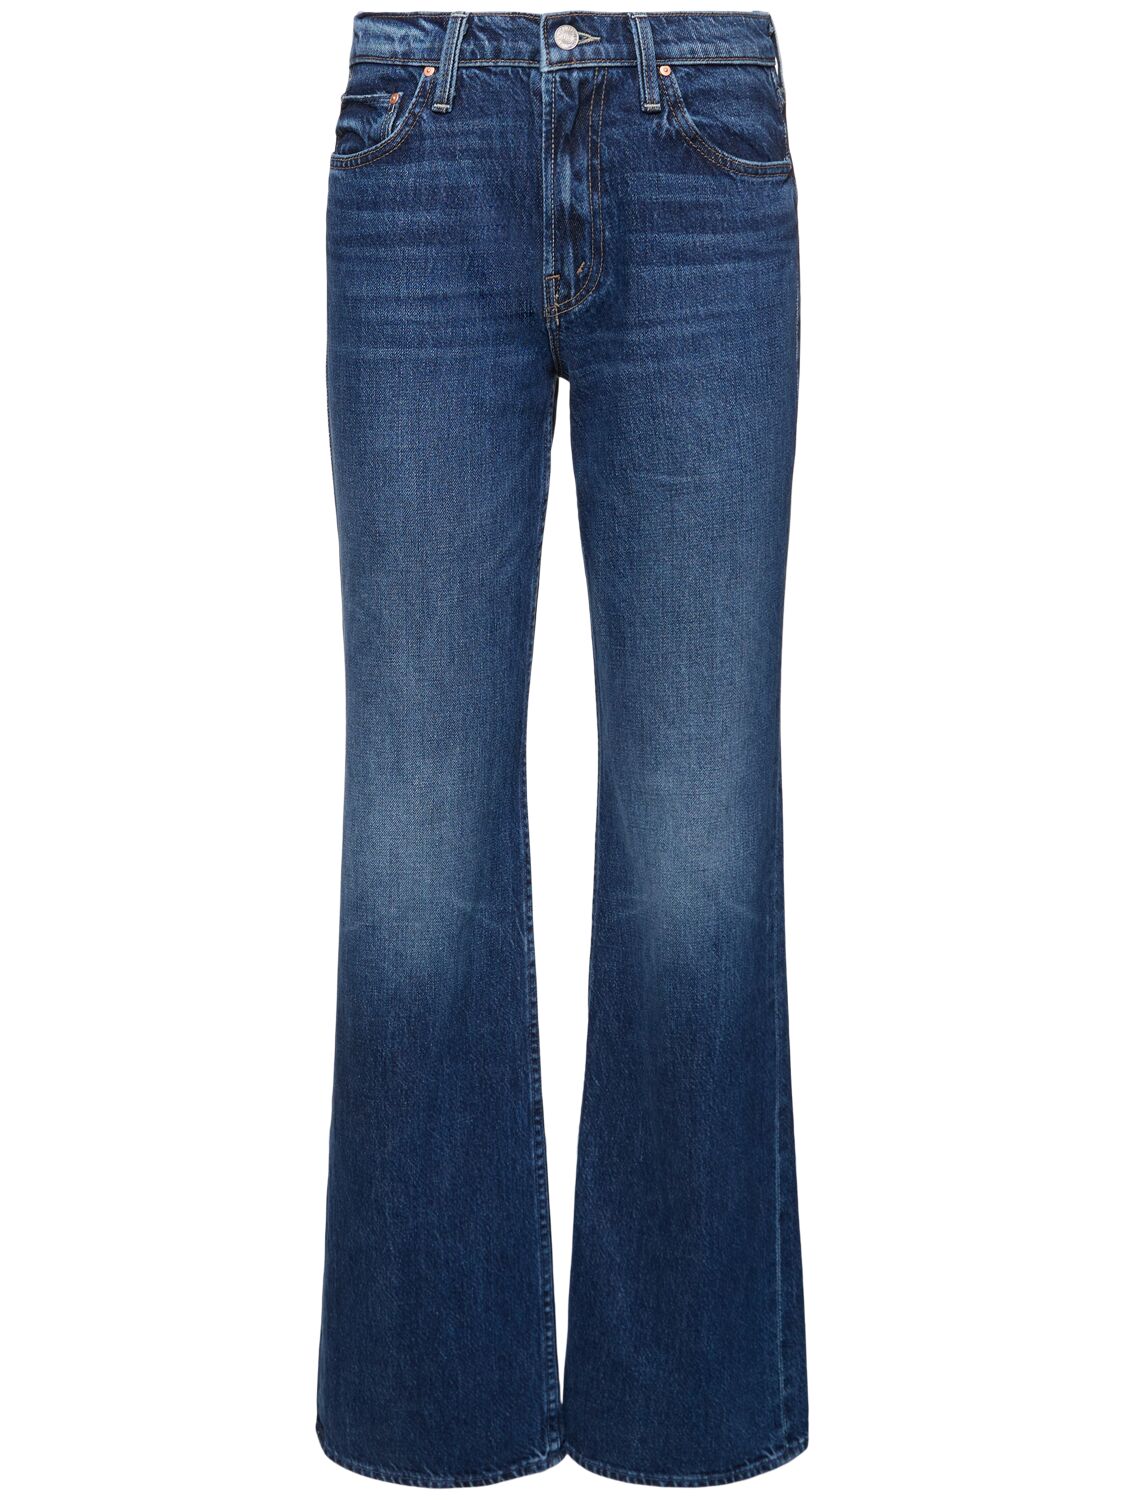 Mujer The Bookie Heel High Rise Jeans 23 - MOTHER - Modalova